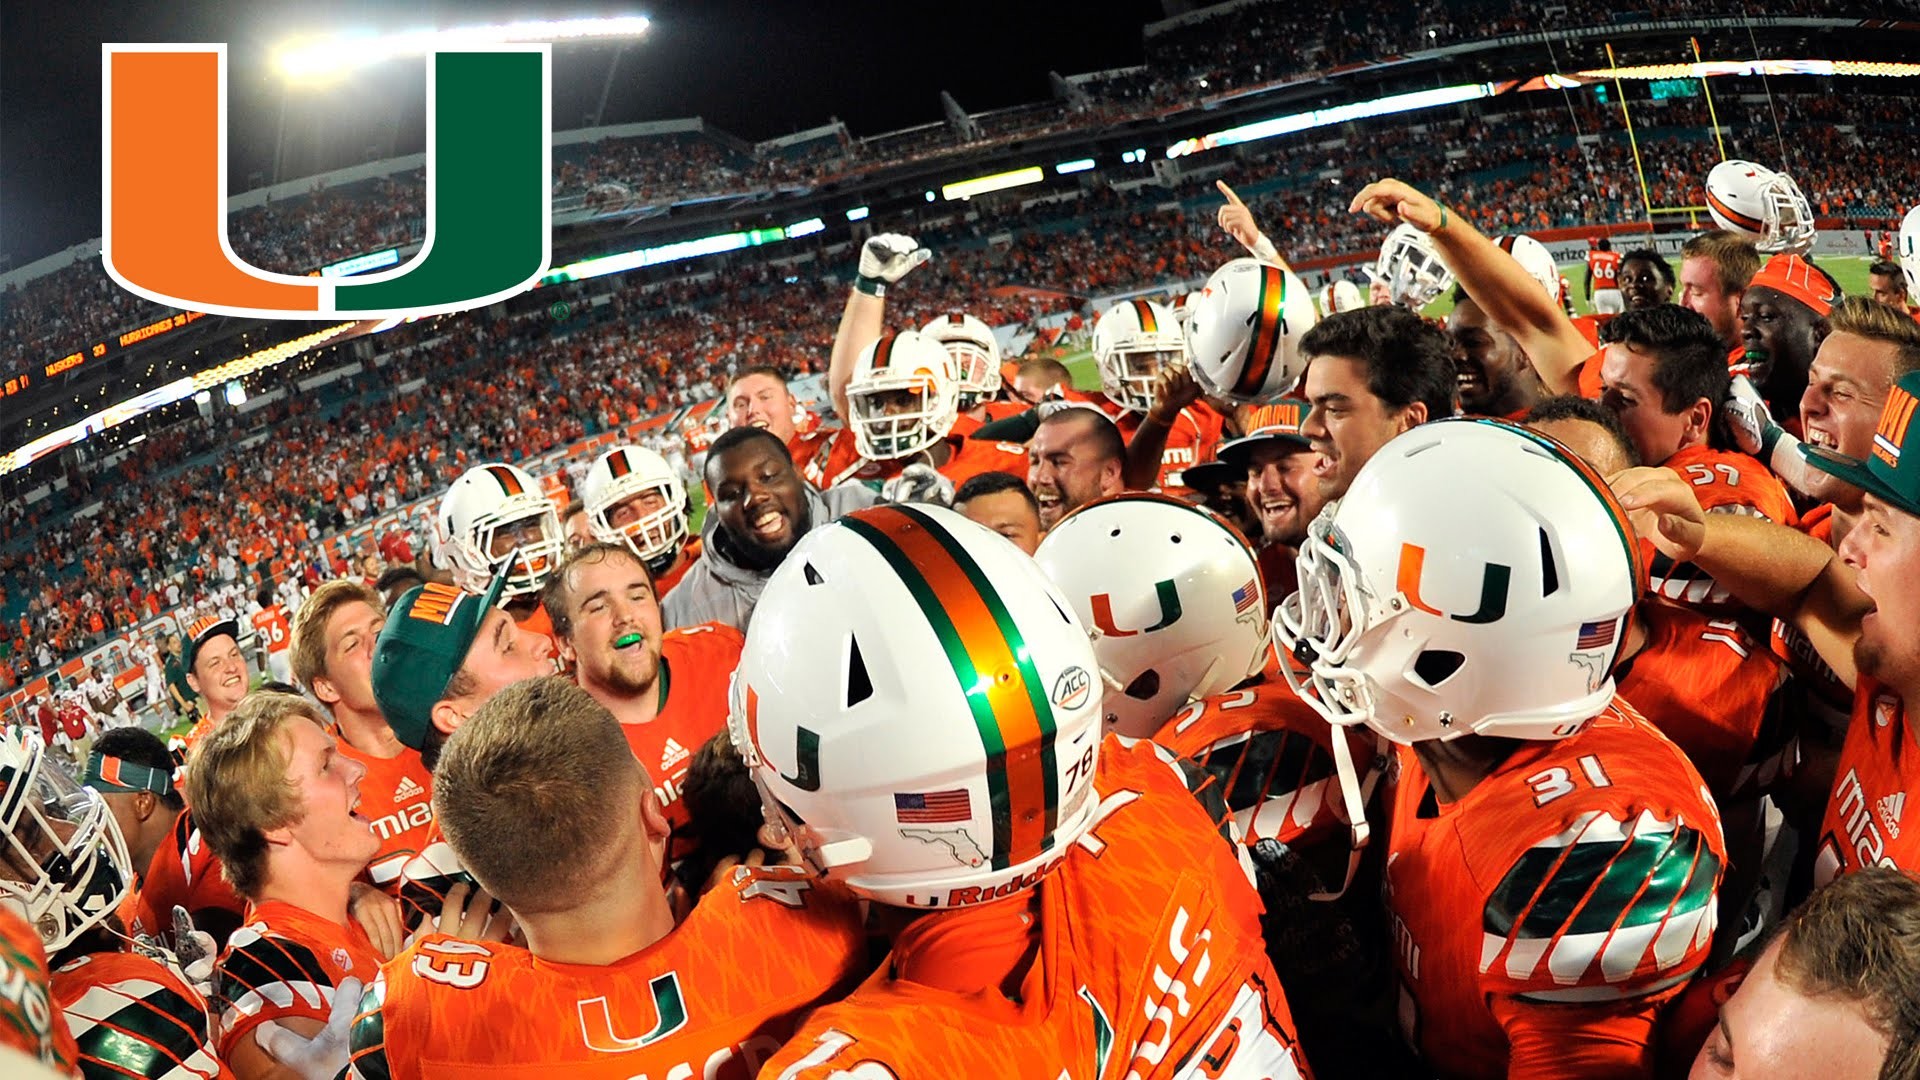 1920x1080 Miami Hurricanes Football Could Be Undefeated For Showdown With FSU